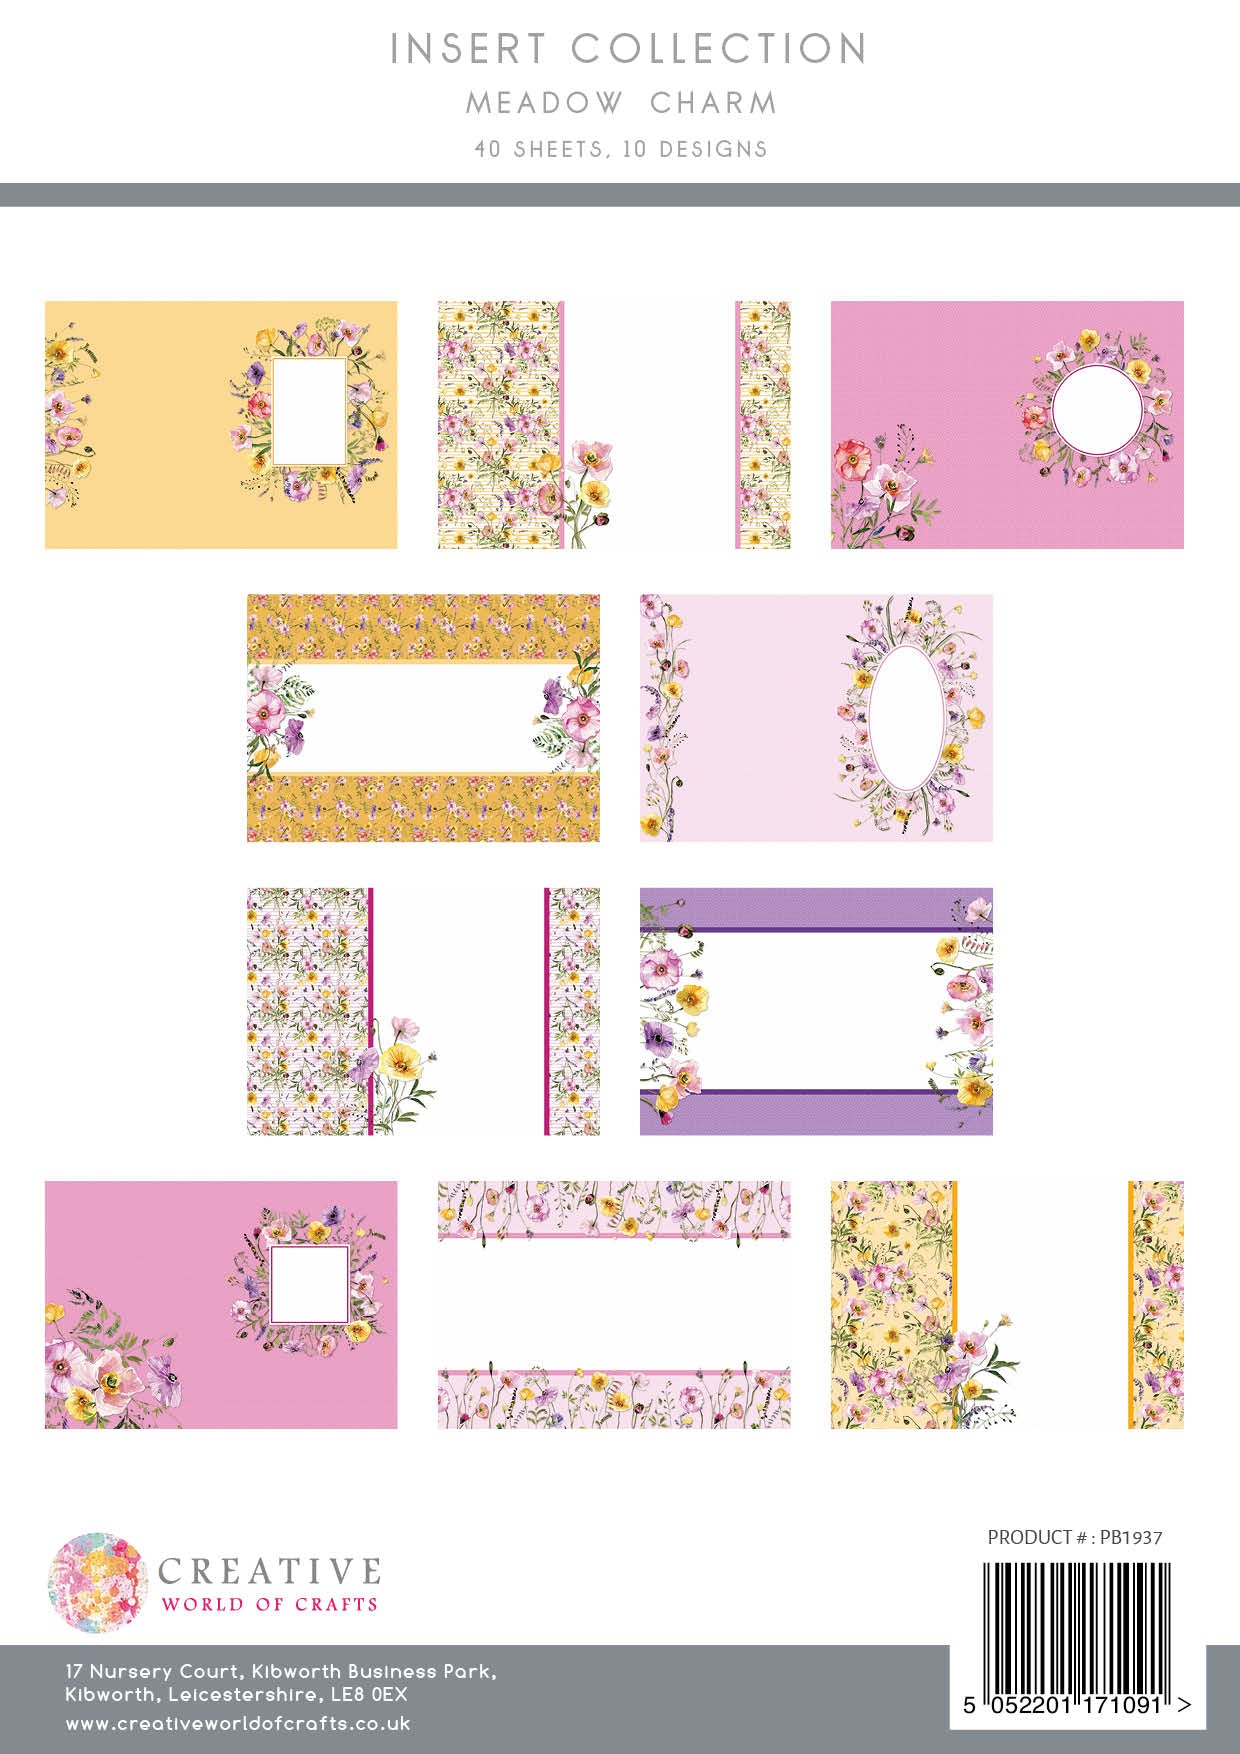 The Paper Boutique Meadow Charm Insert Collection